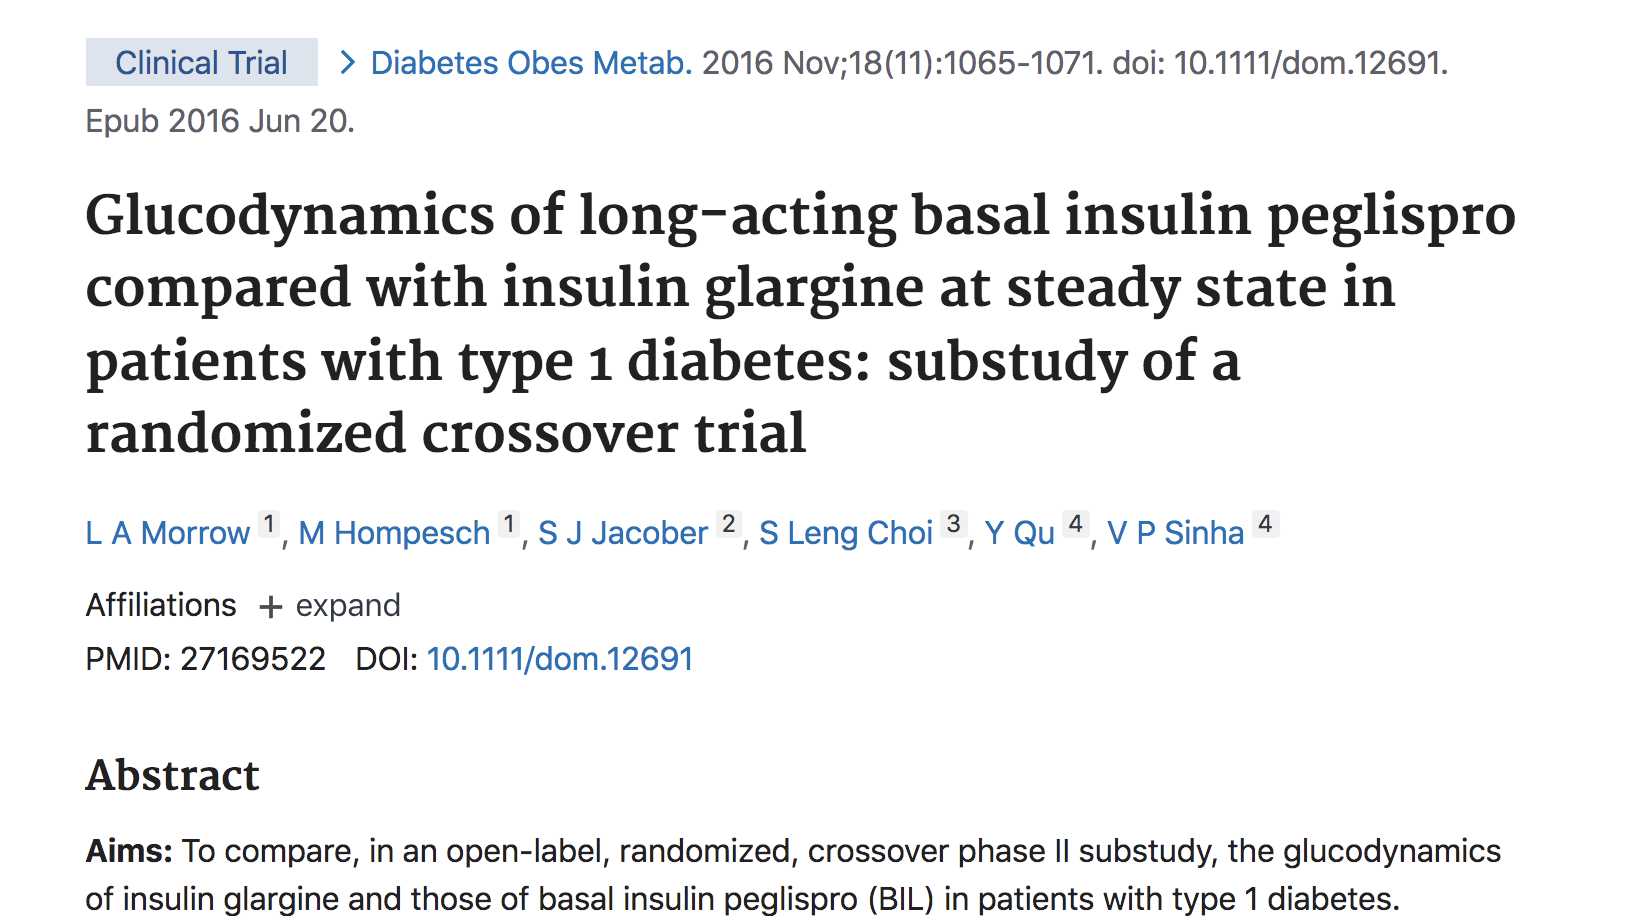 Glucodynamics of Long-Acting Basal Insulin Peglispro (BIL) Compared With Insulin Glargine at Steady State in Subjects with Type 1 Diabetes: substudy of a randomized crossover trial. thumbnail